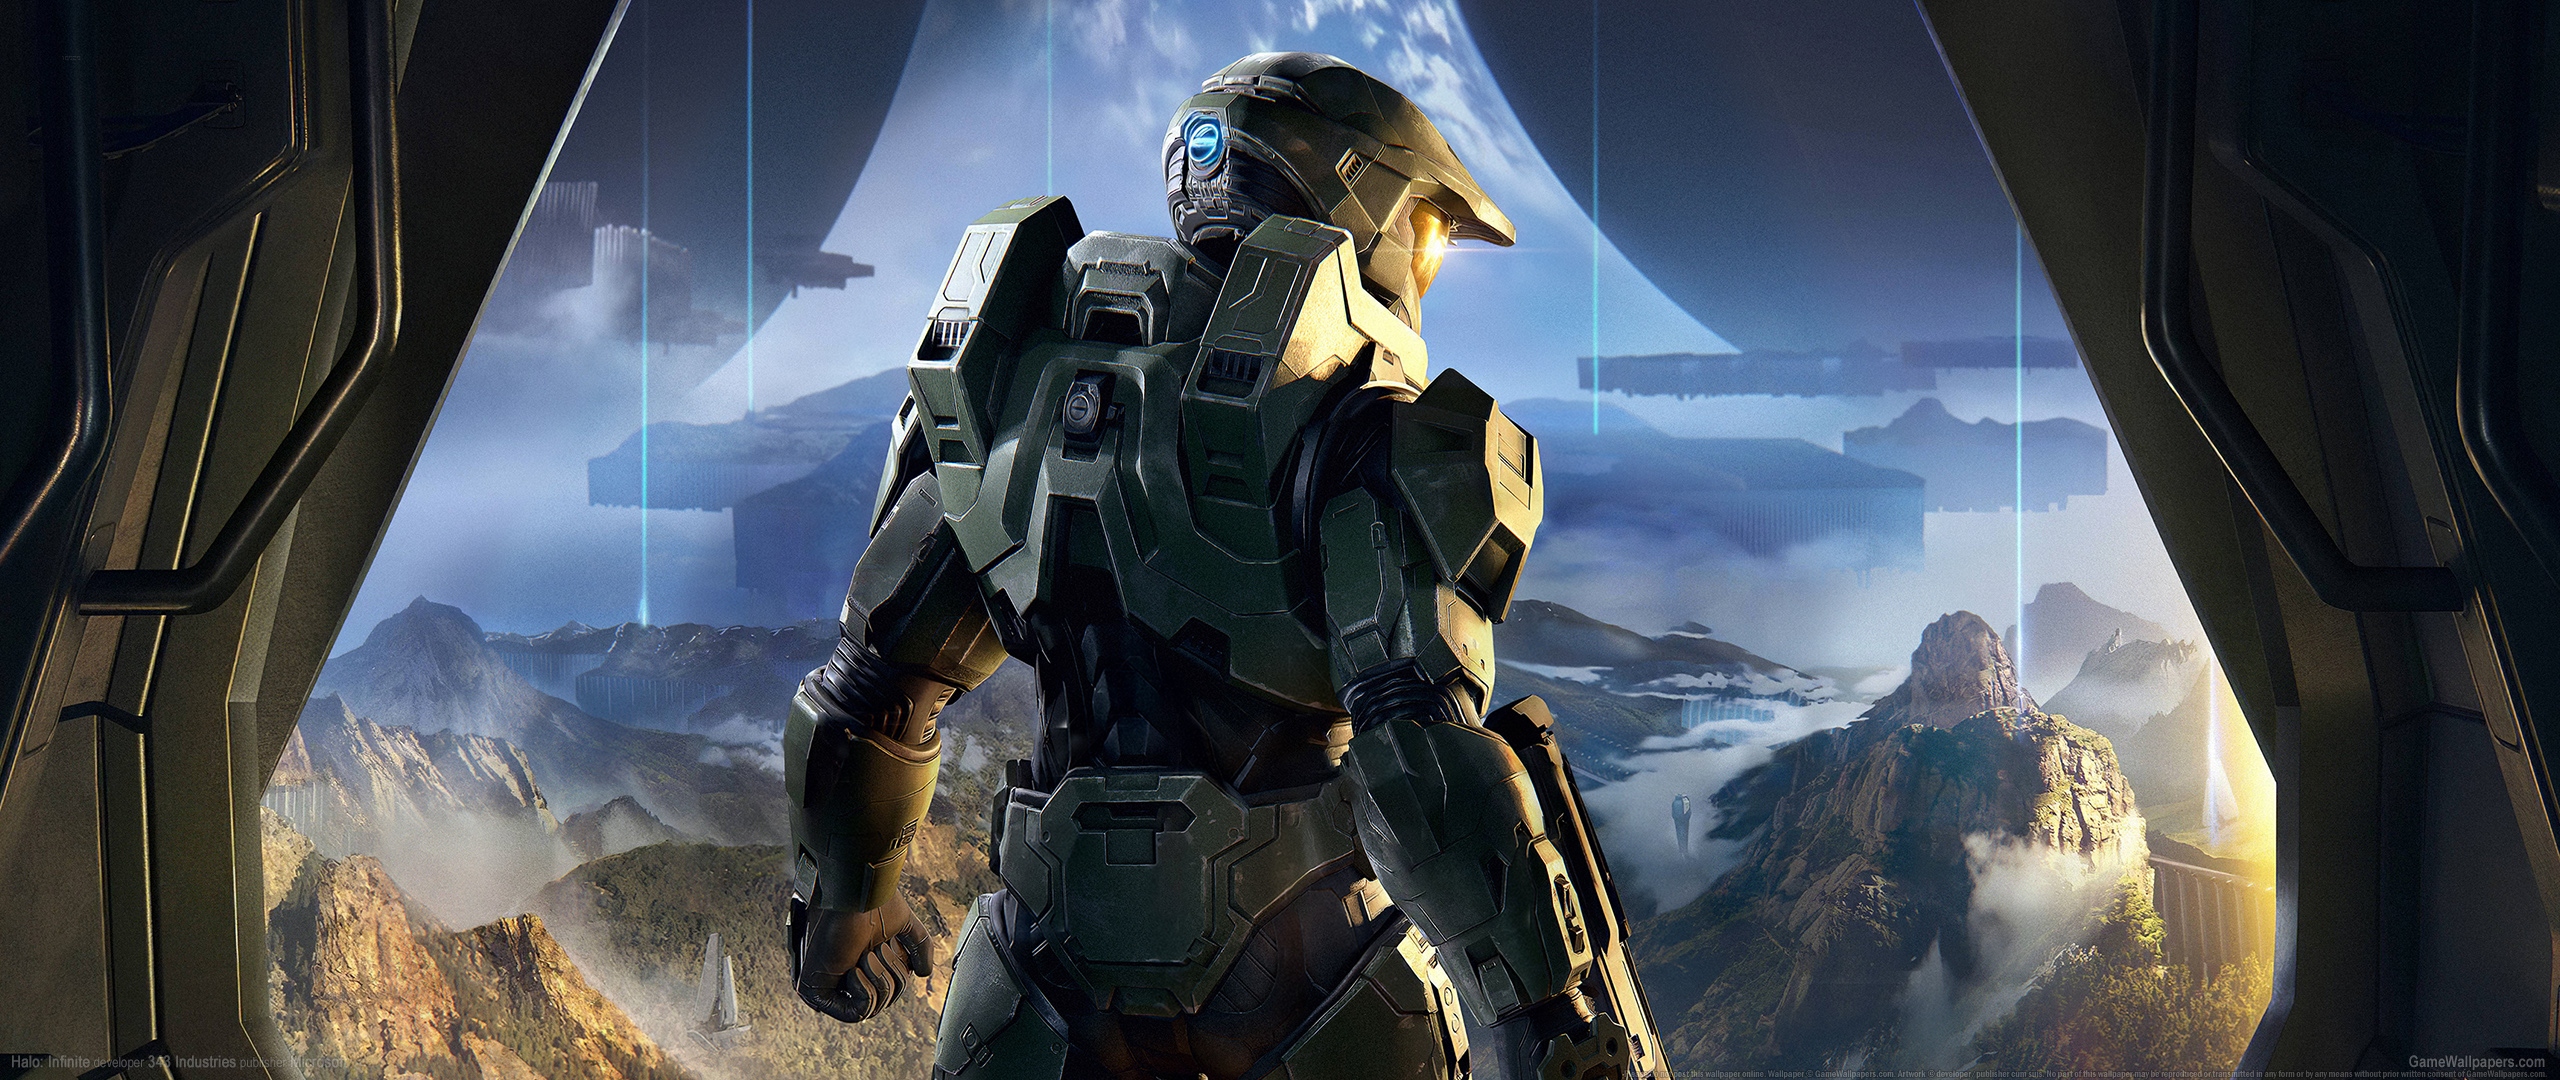 Halo: Infinite 2560x1080 wallpaper or background 02